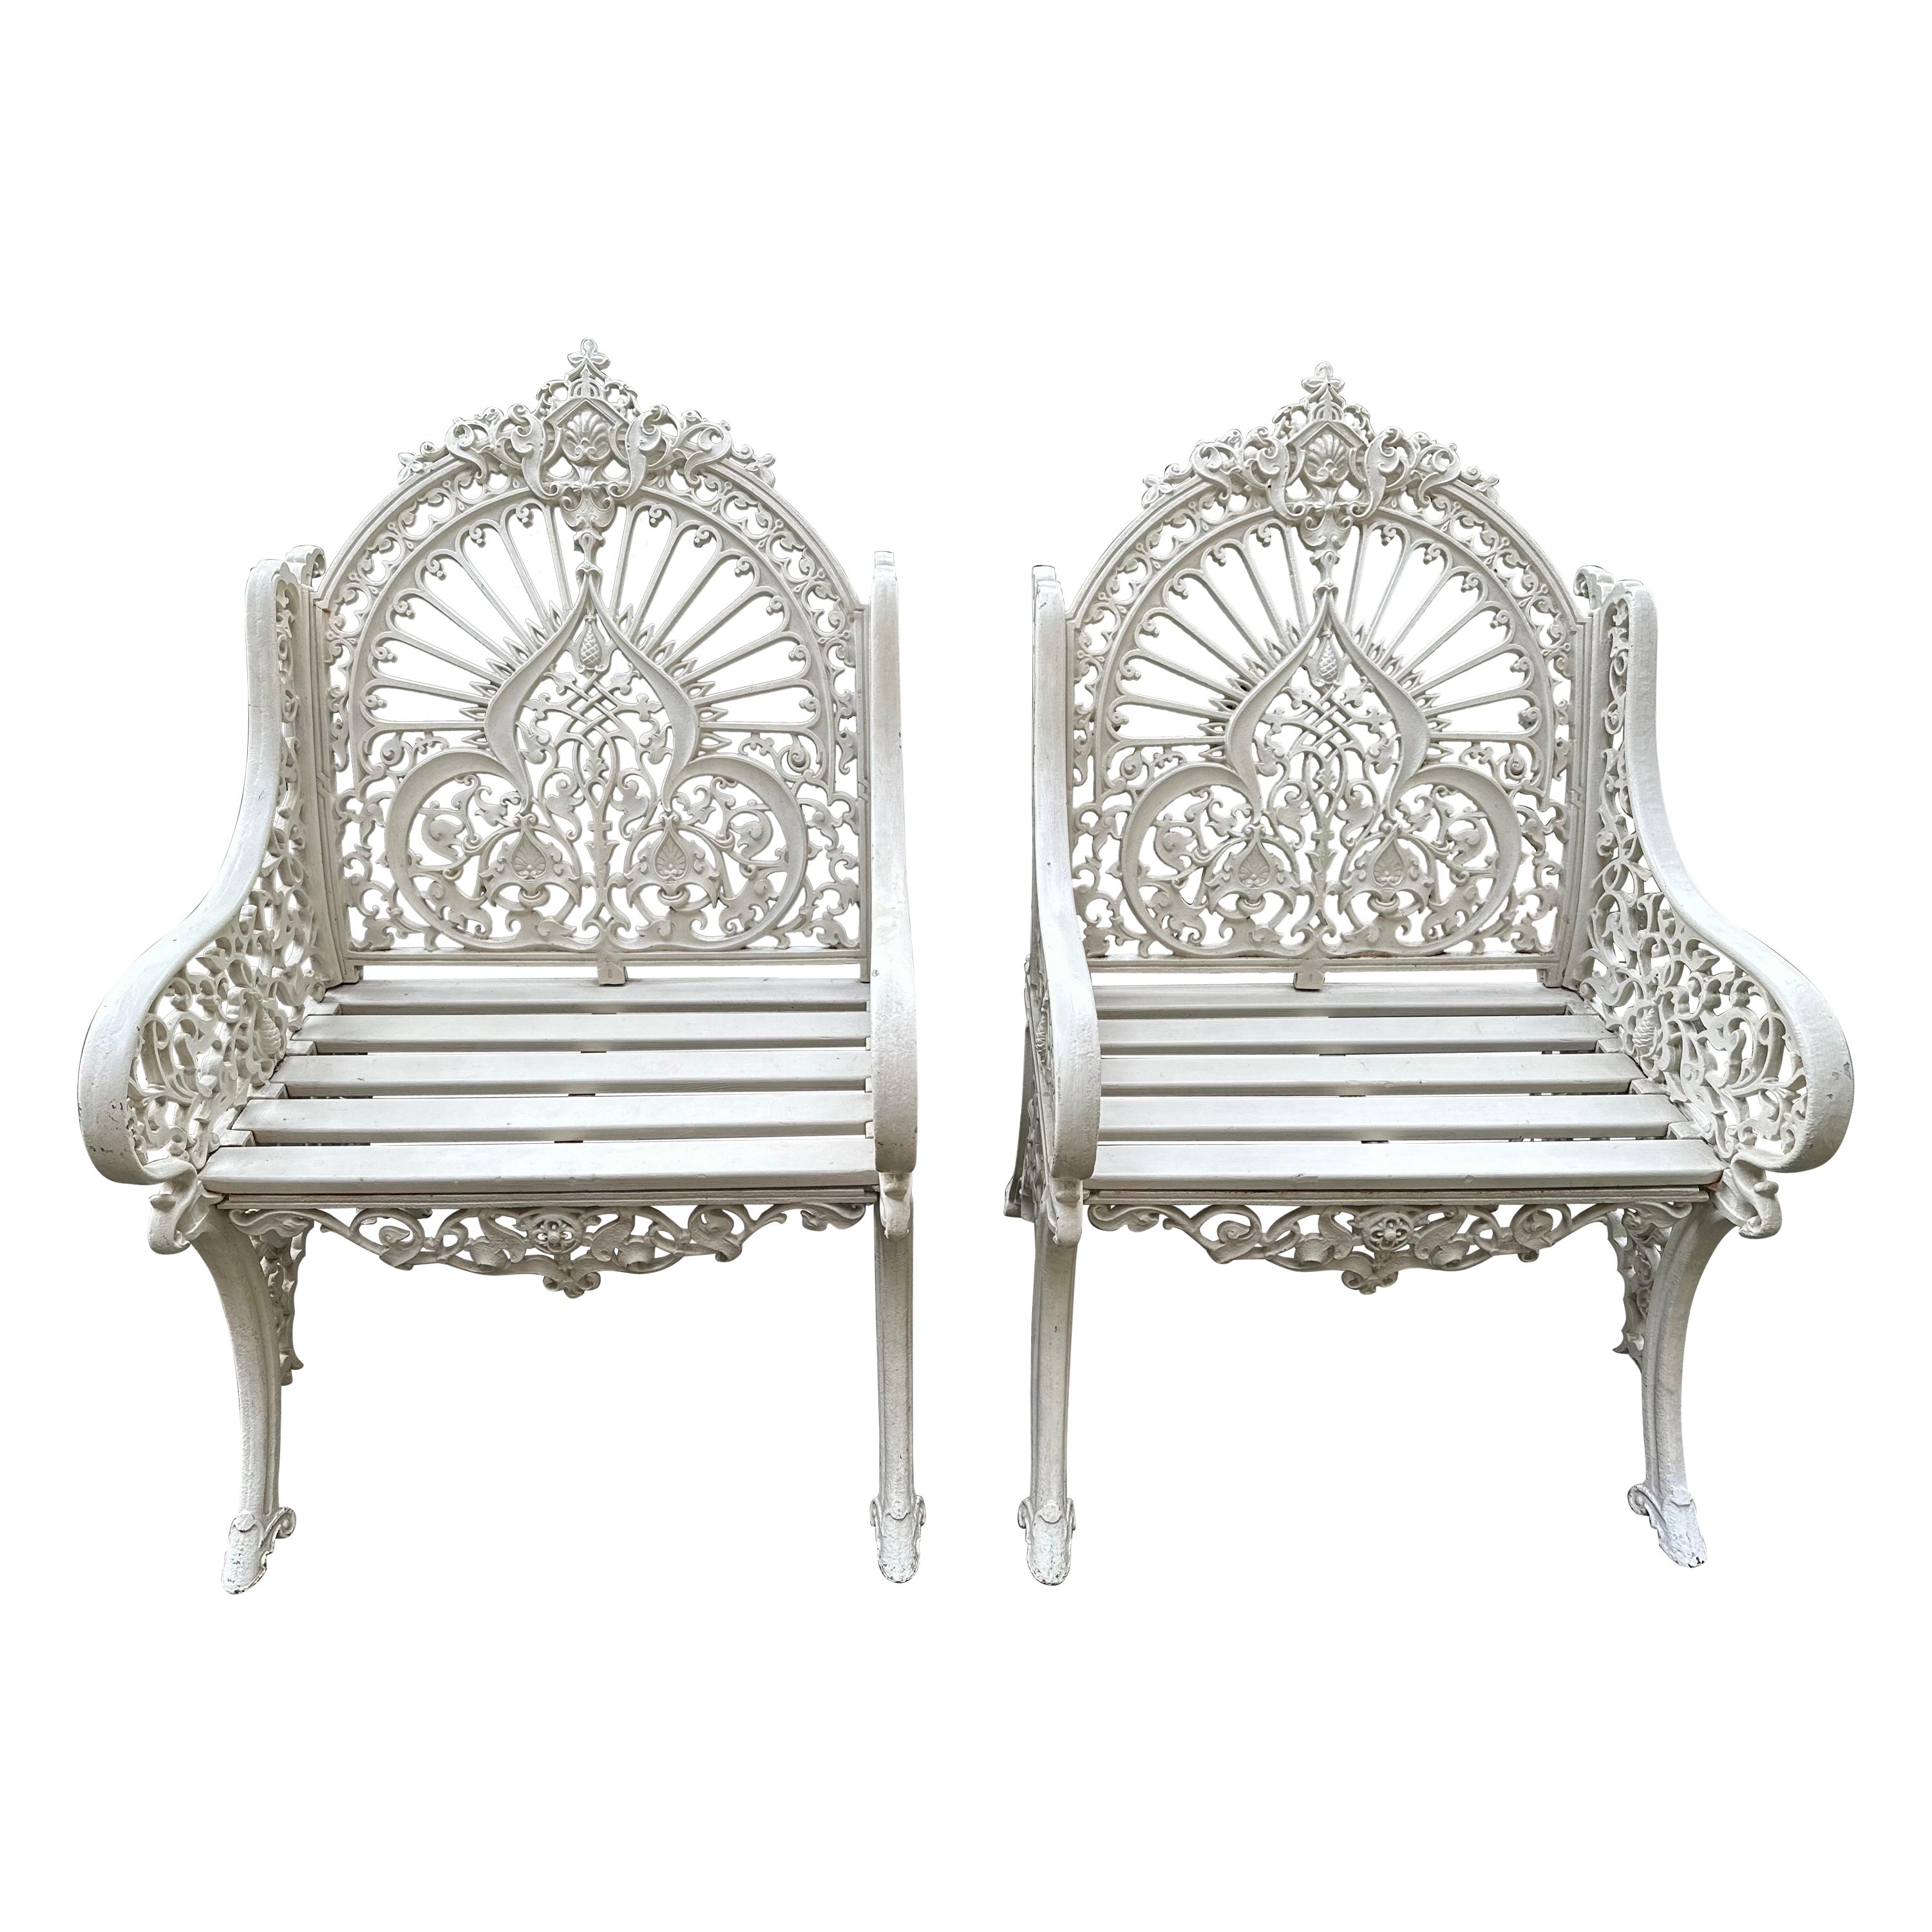 Original Coalbrookdale Peacock Chairs design mark 90928 & stamped year 1853. For Sale